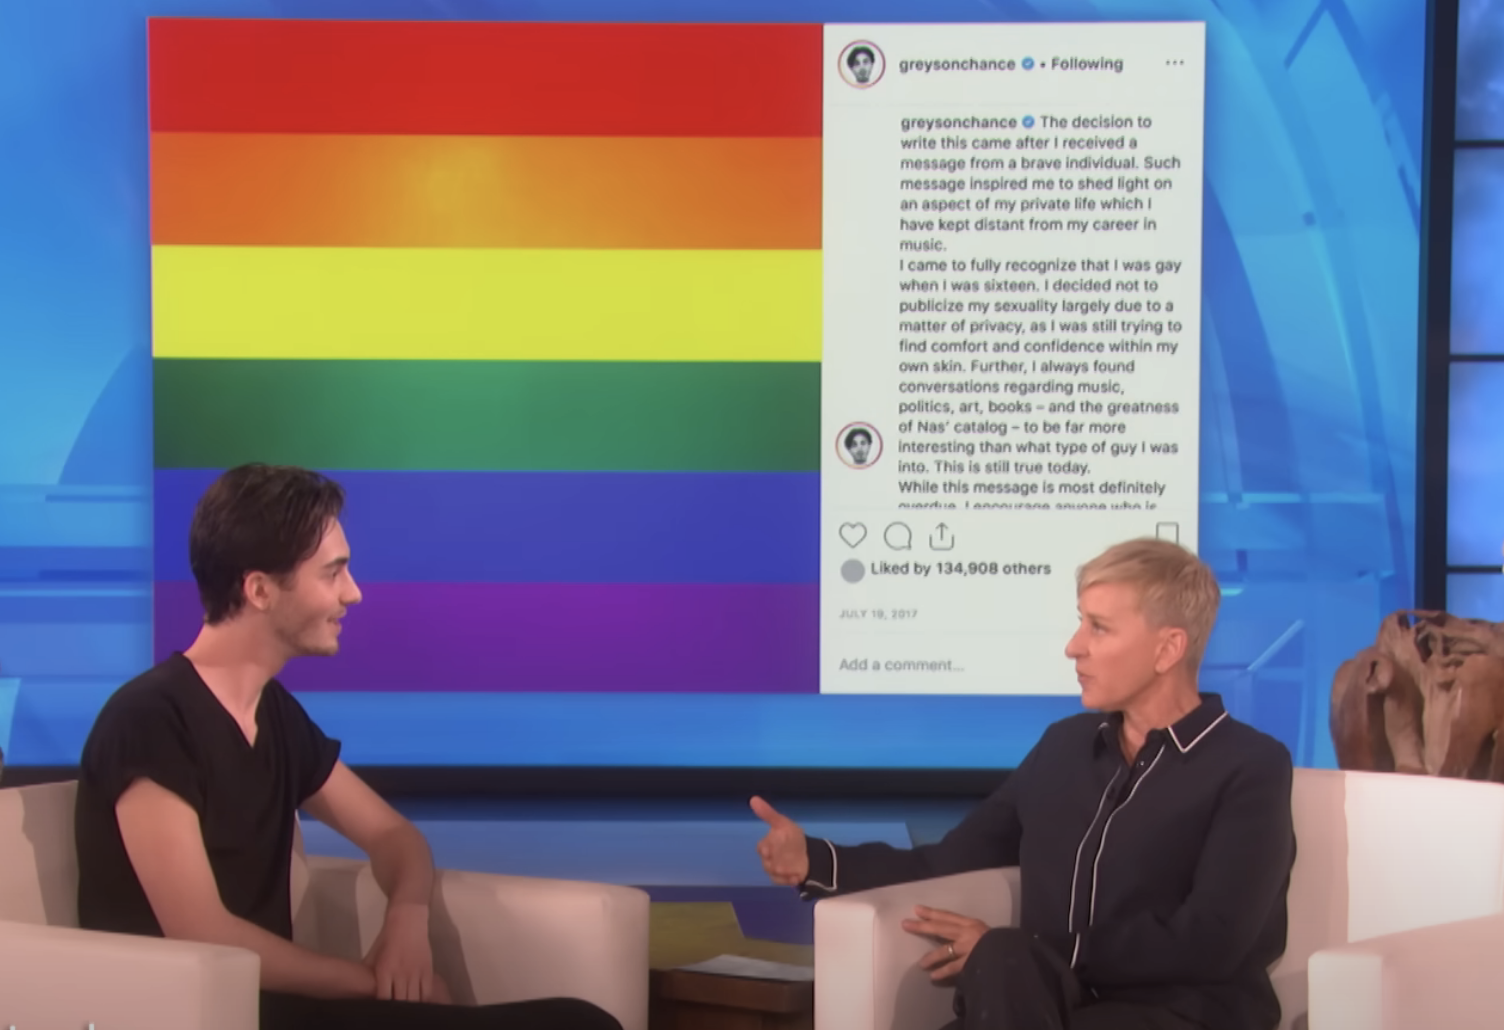 Greyson and Ellen talking on her show with his Instagram post and rainbow colors on a screen in the background